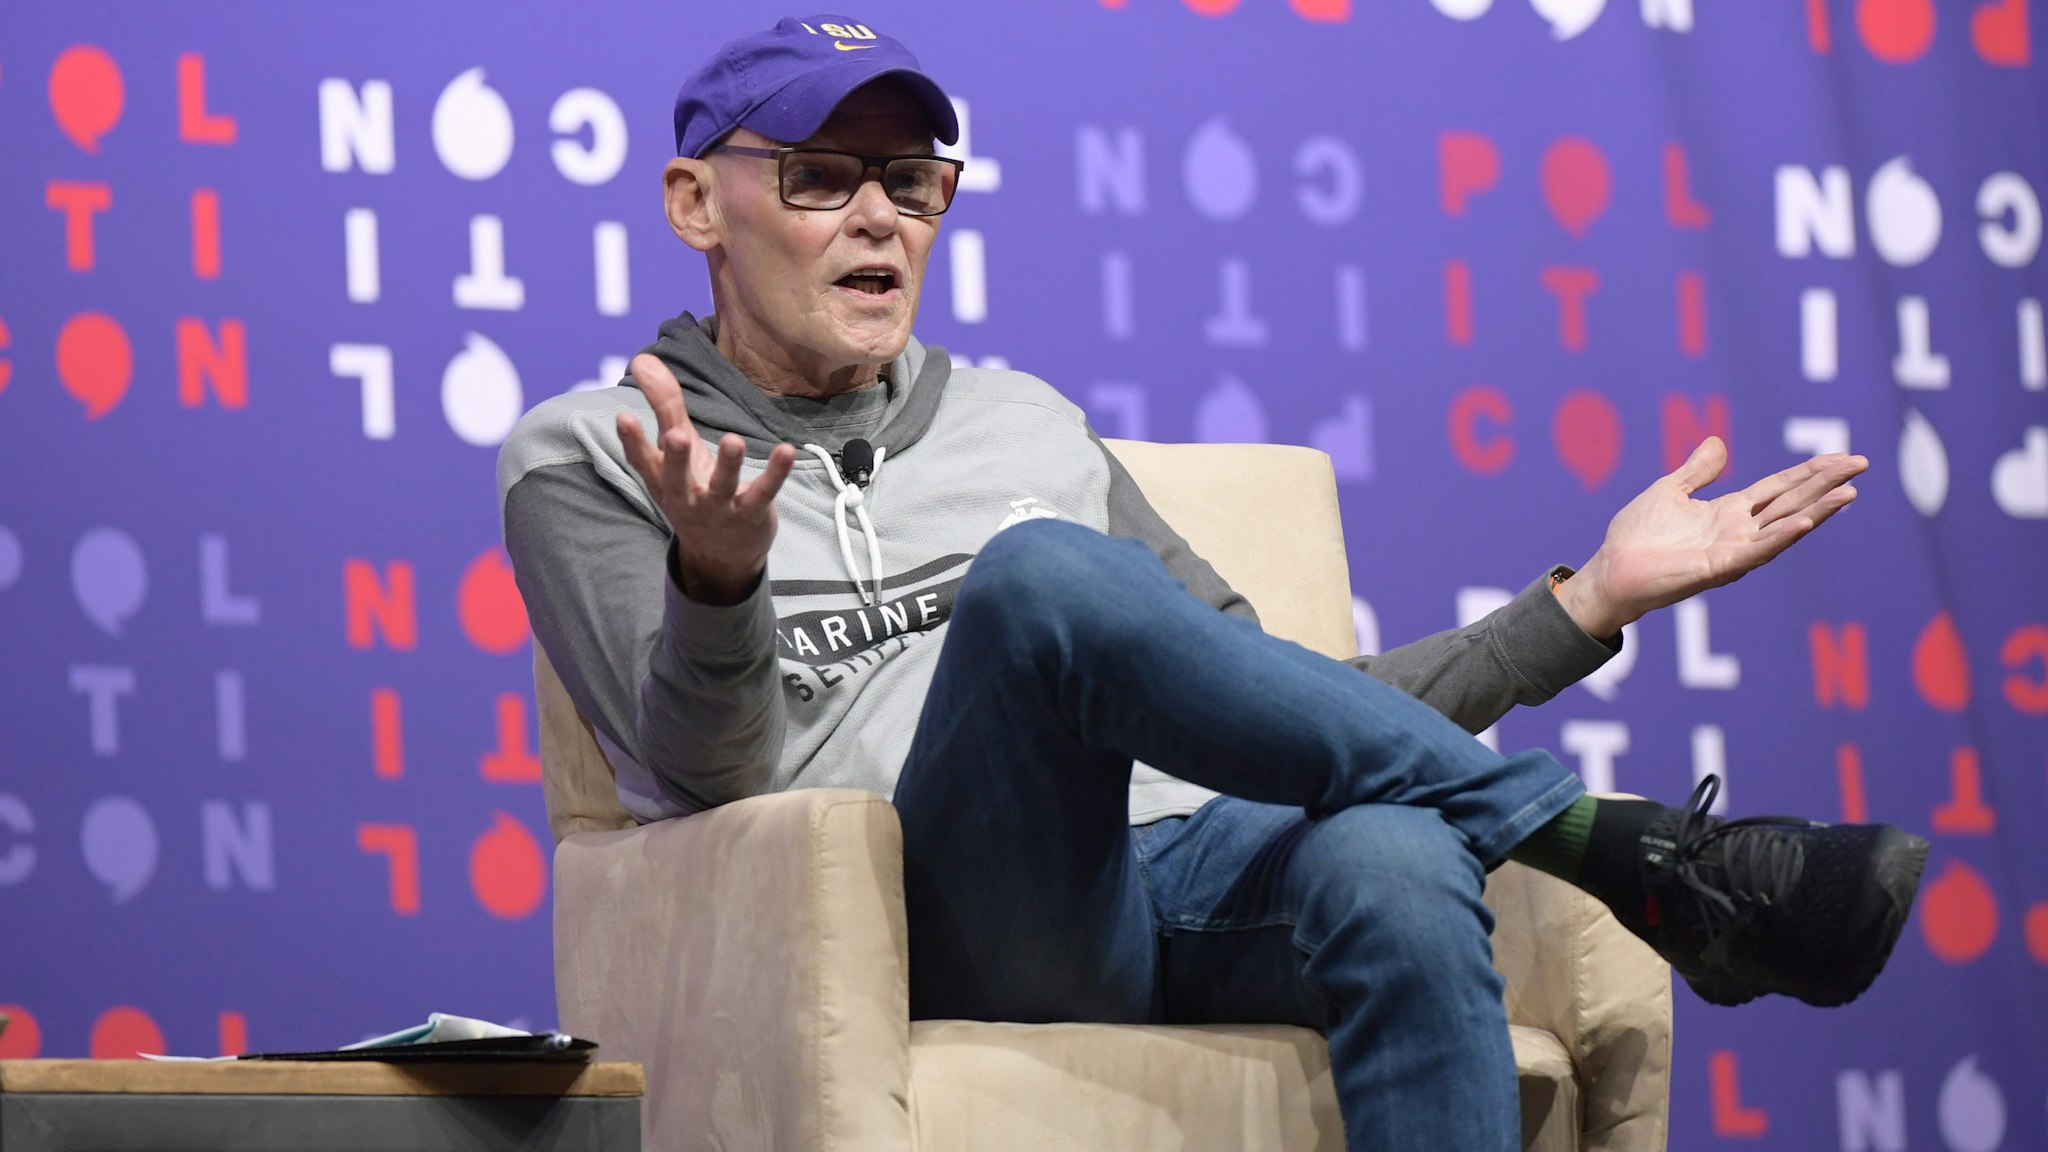 NASHVILLE, TENNESSEE - OCTOBER 26: James Carville speaks onstage during the 2019 Politicon at Music City Center on October 26, 2019 in Nashville, Tennessee. (Photo by Jason Kempin/Getty Images for Politicon )r Politicon )